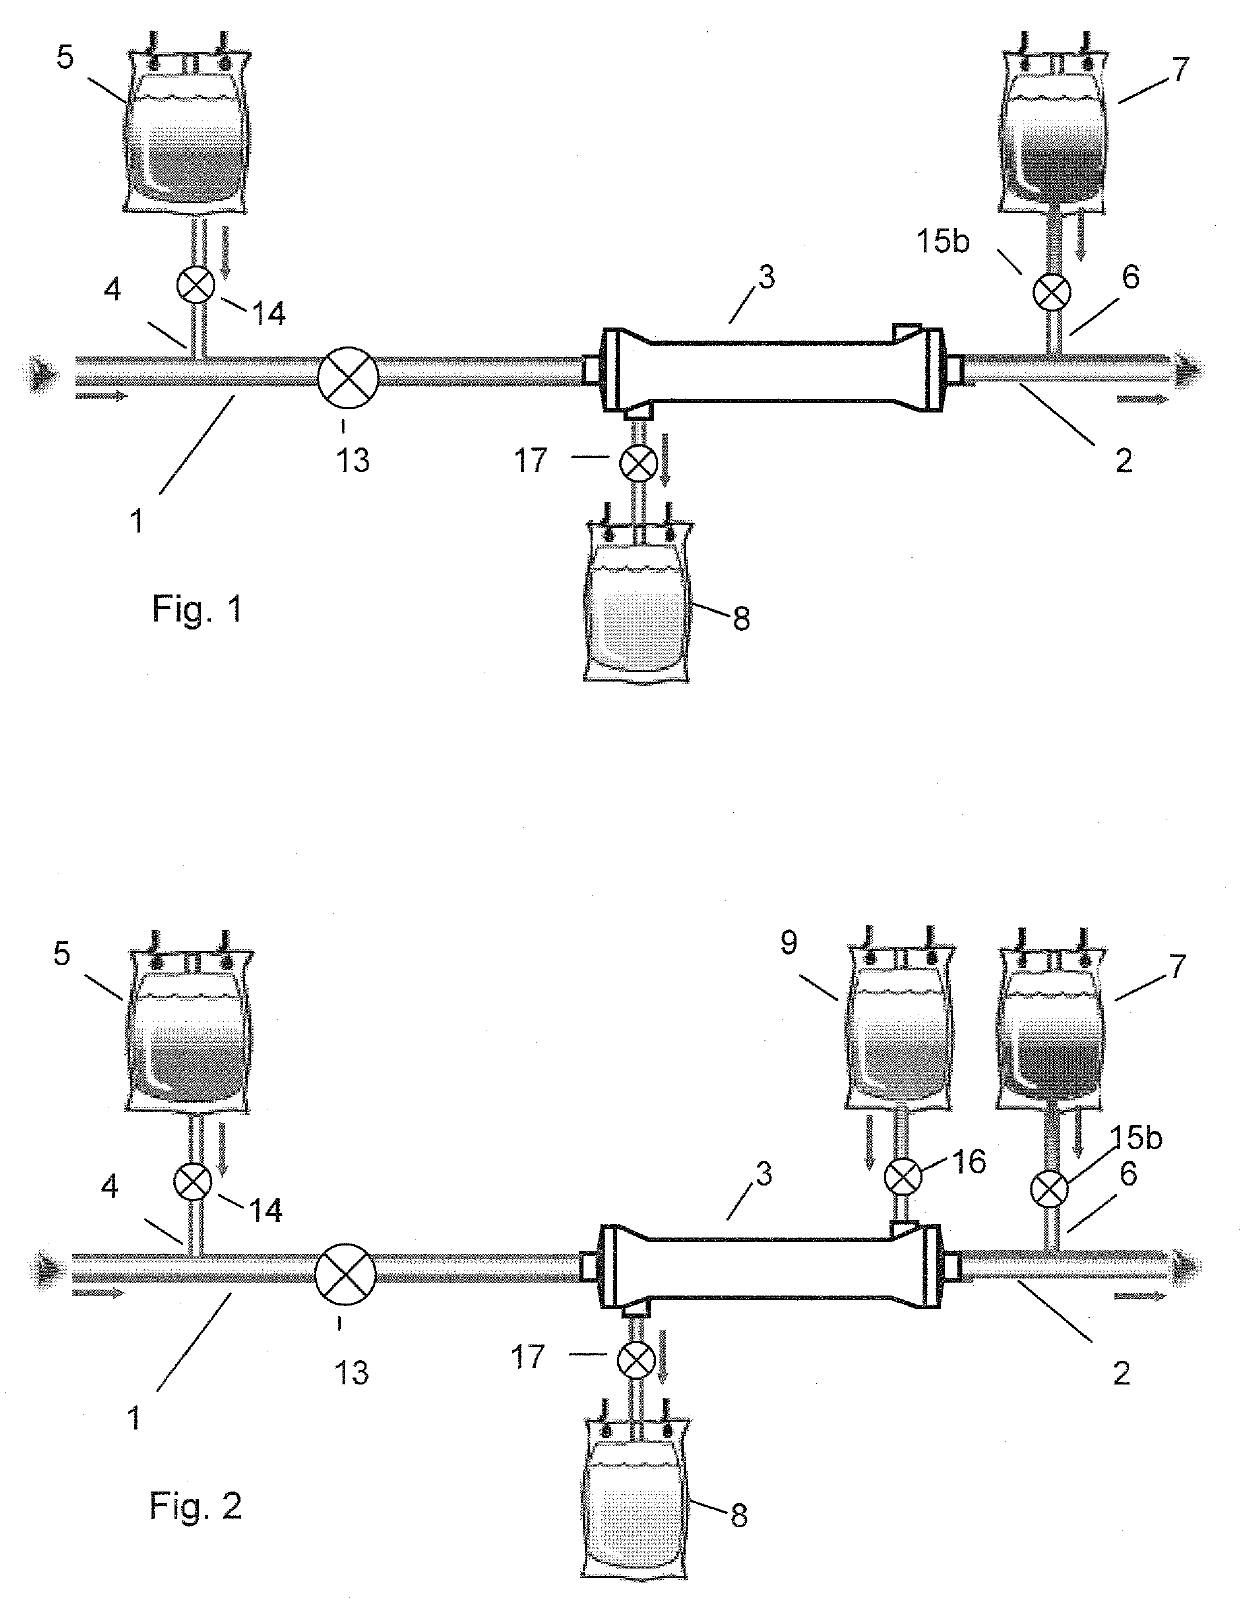 Multipart fluid system and a system for citrate anticoagulation in an extracorporeal blood circuit